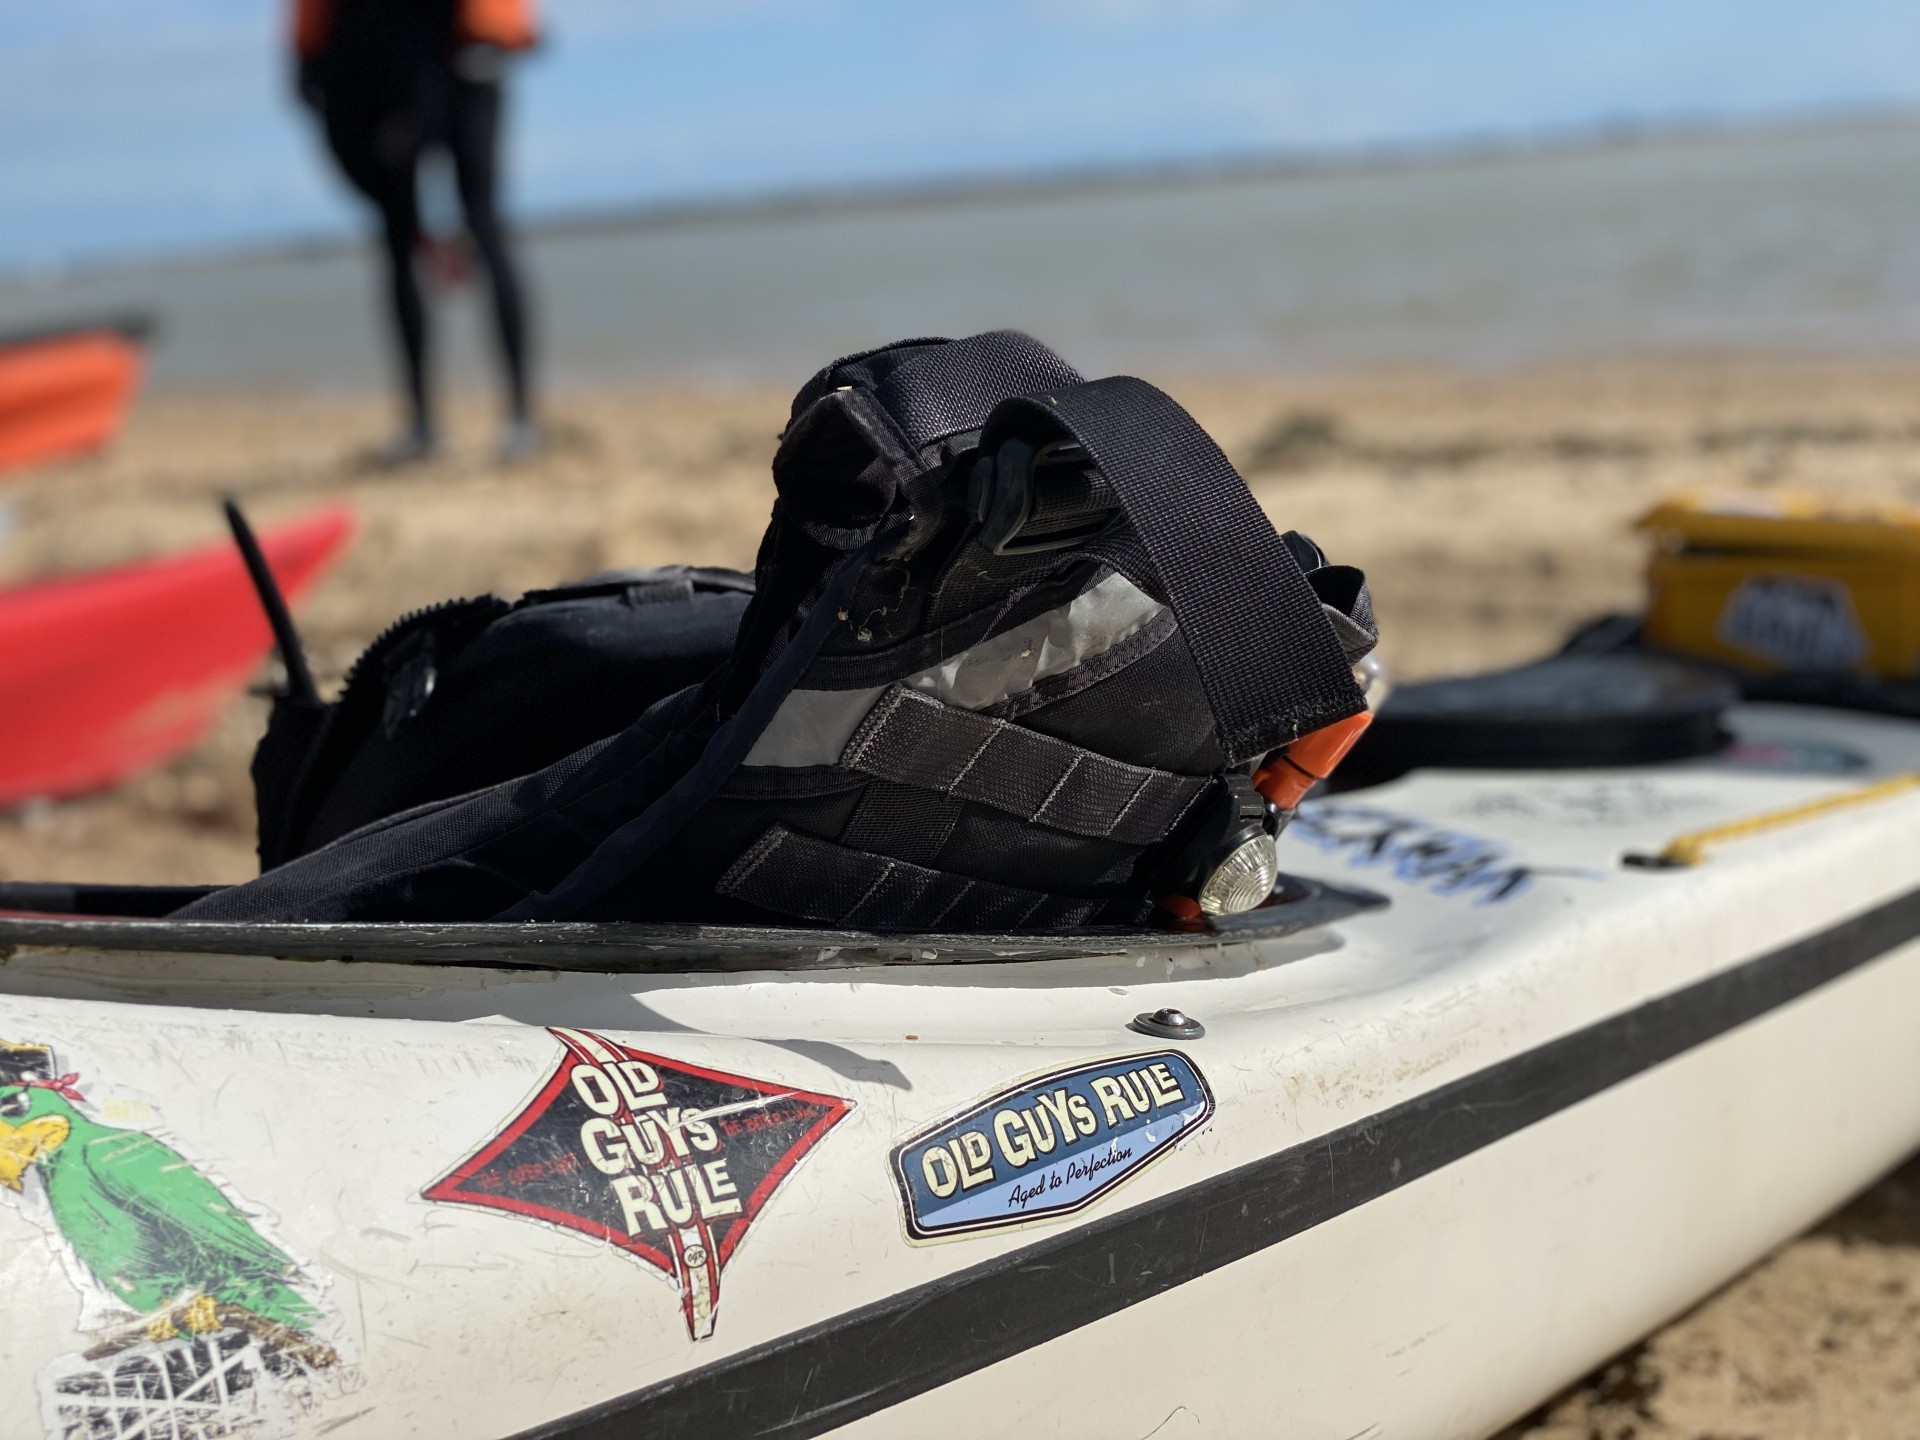 Sea kayak with a lot of stickers